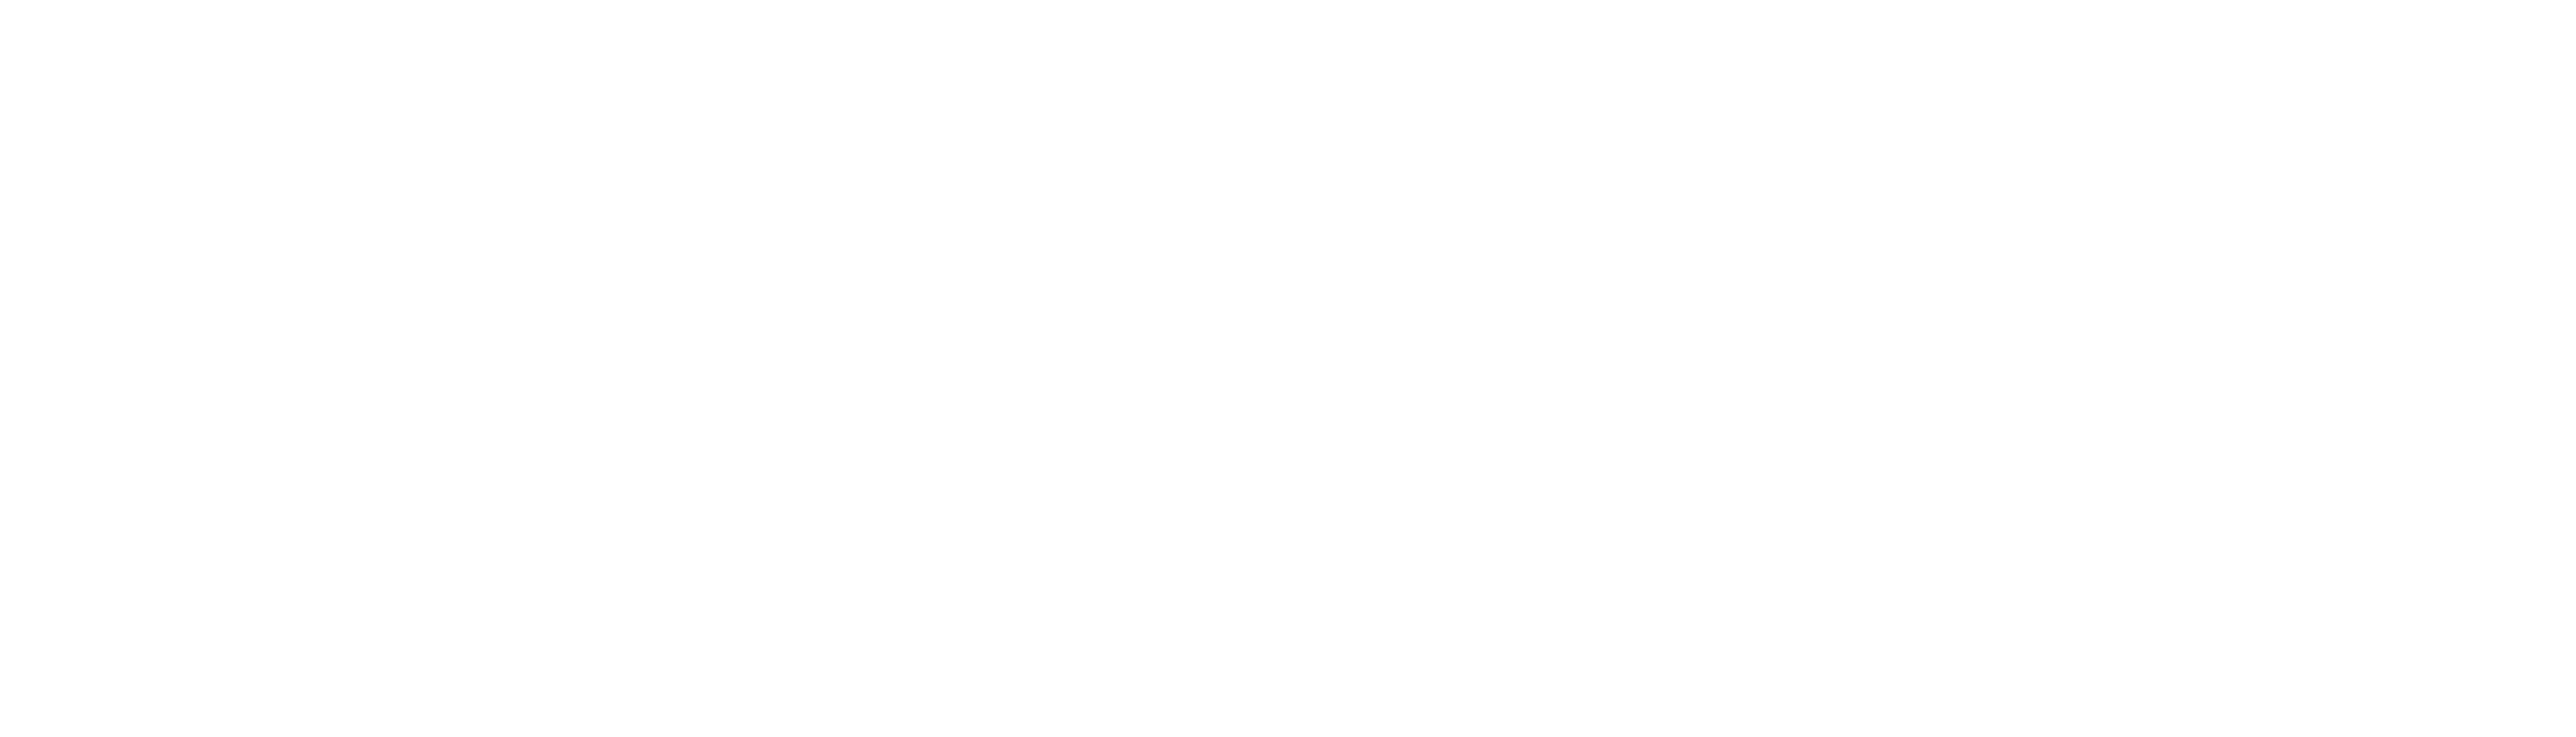 Drug and Alcohol Recovery HMP Leyhill logo in white